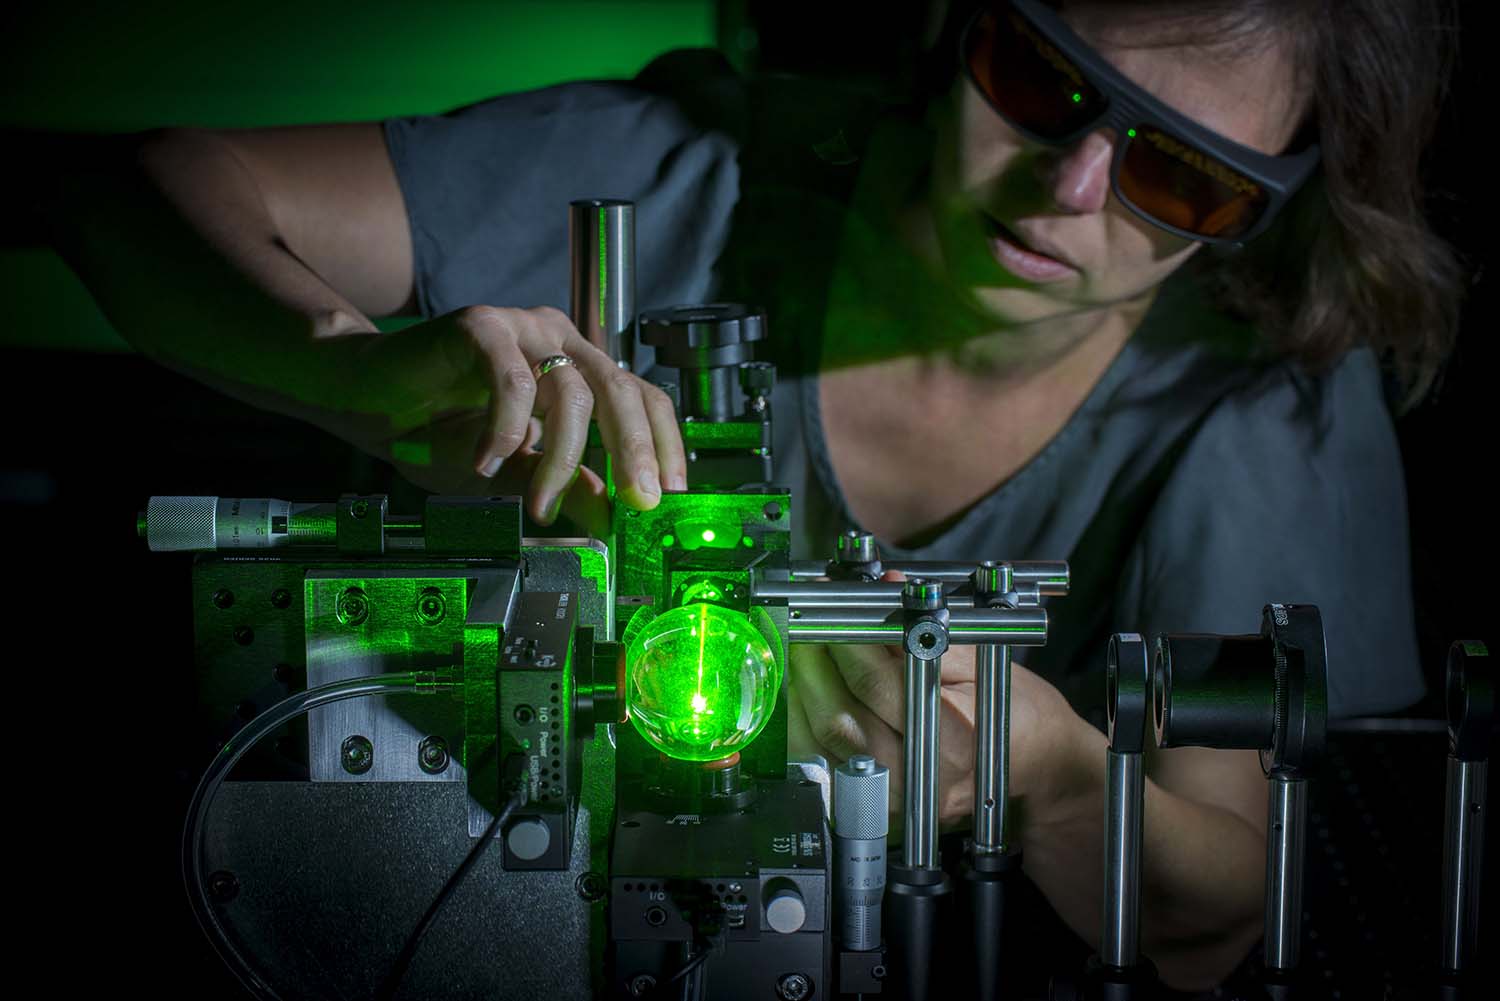 Examining a KDP sphere using a green laser.